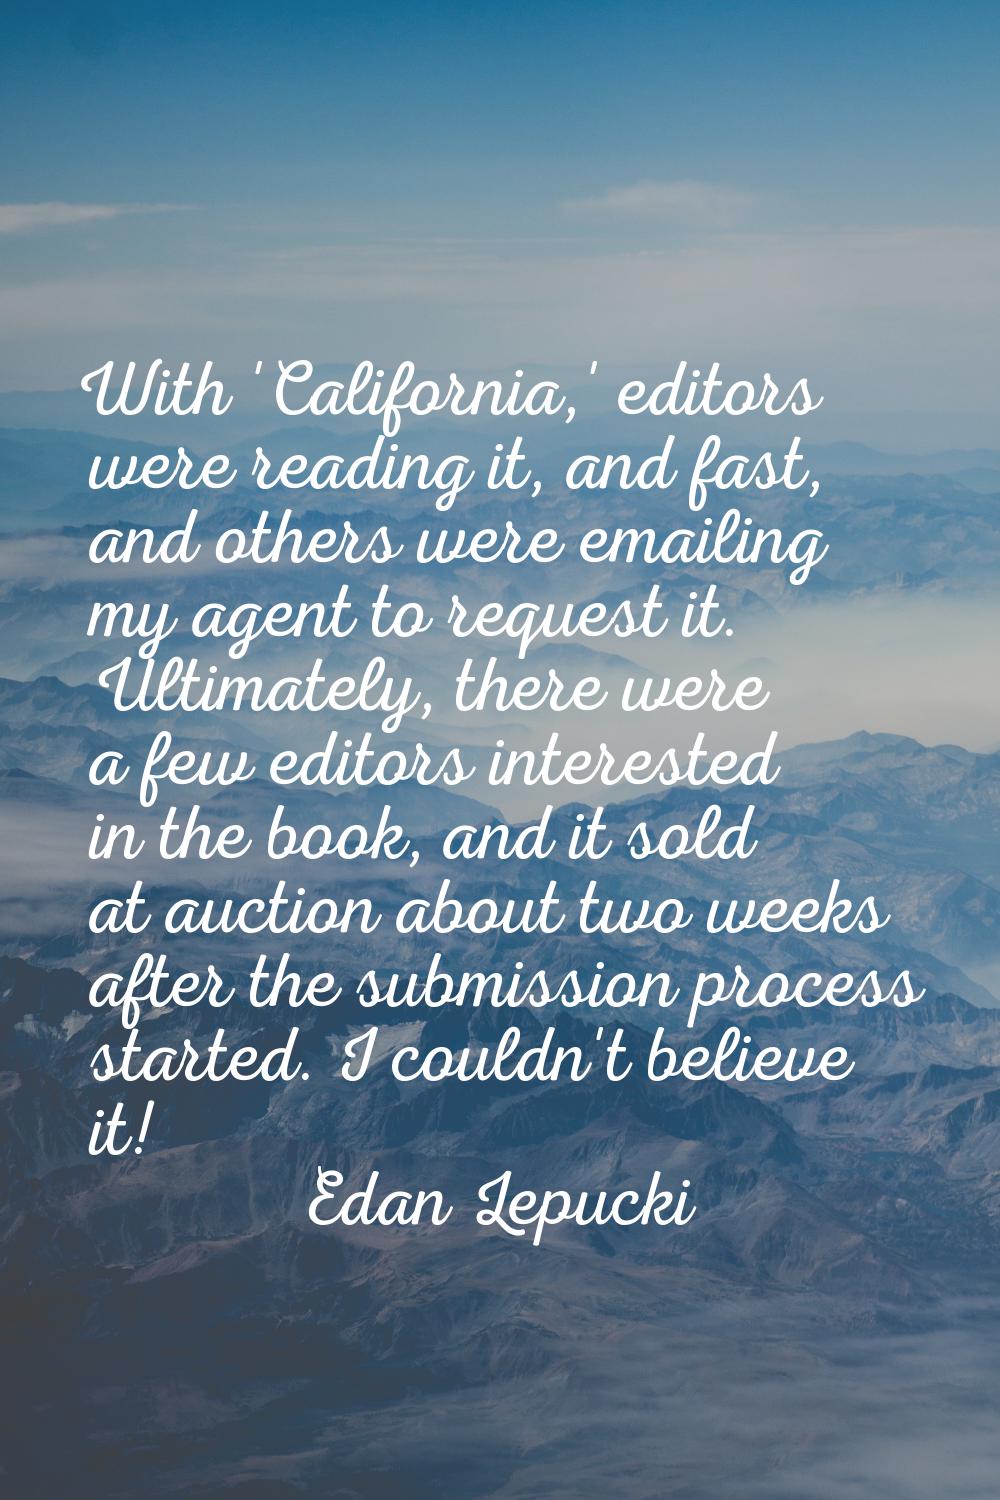 With 'California,' editors were reading it, and fast, and others were emailing my agent to request 